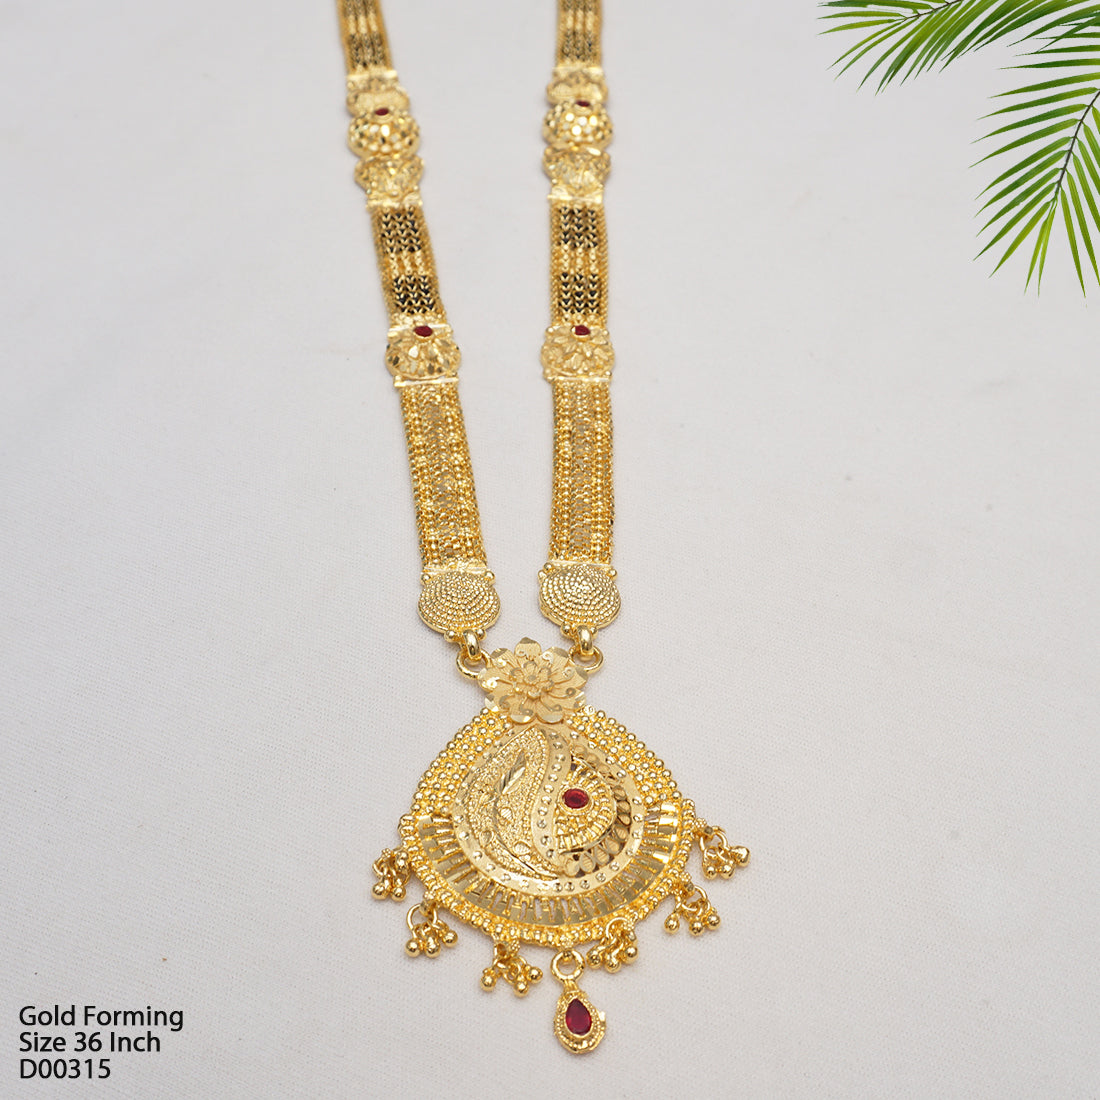 Forming Mangalsutra 36 inch